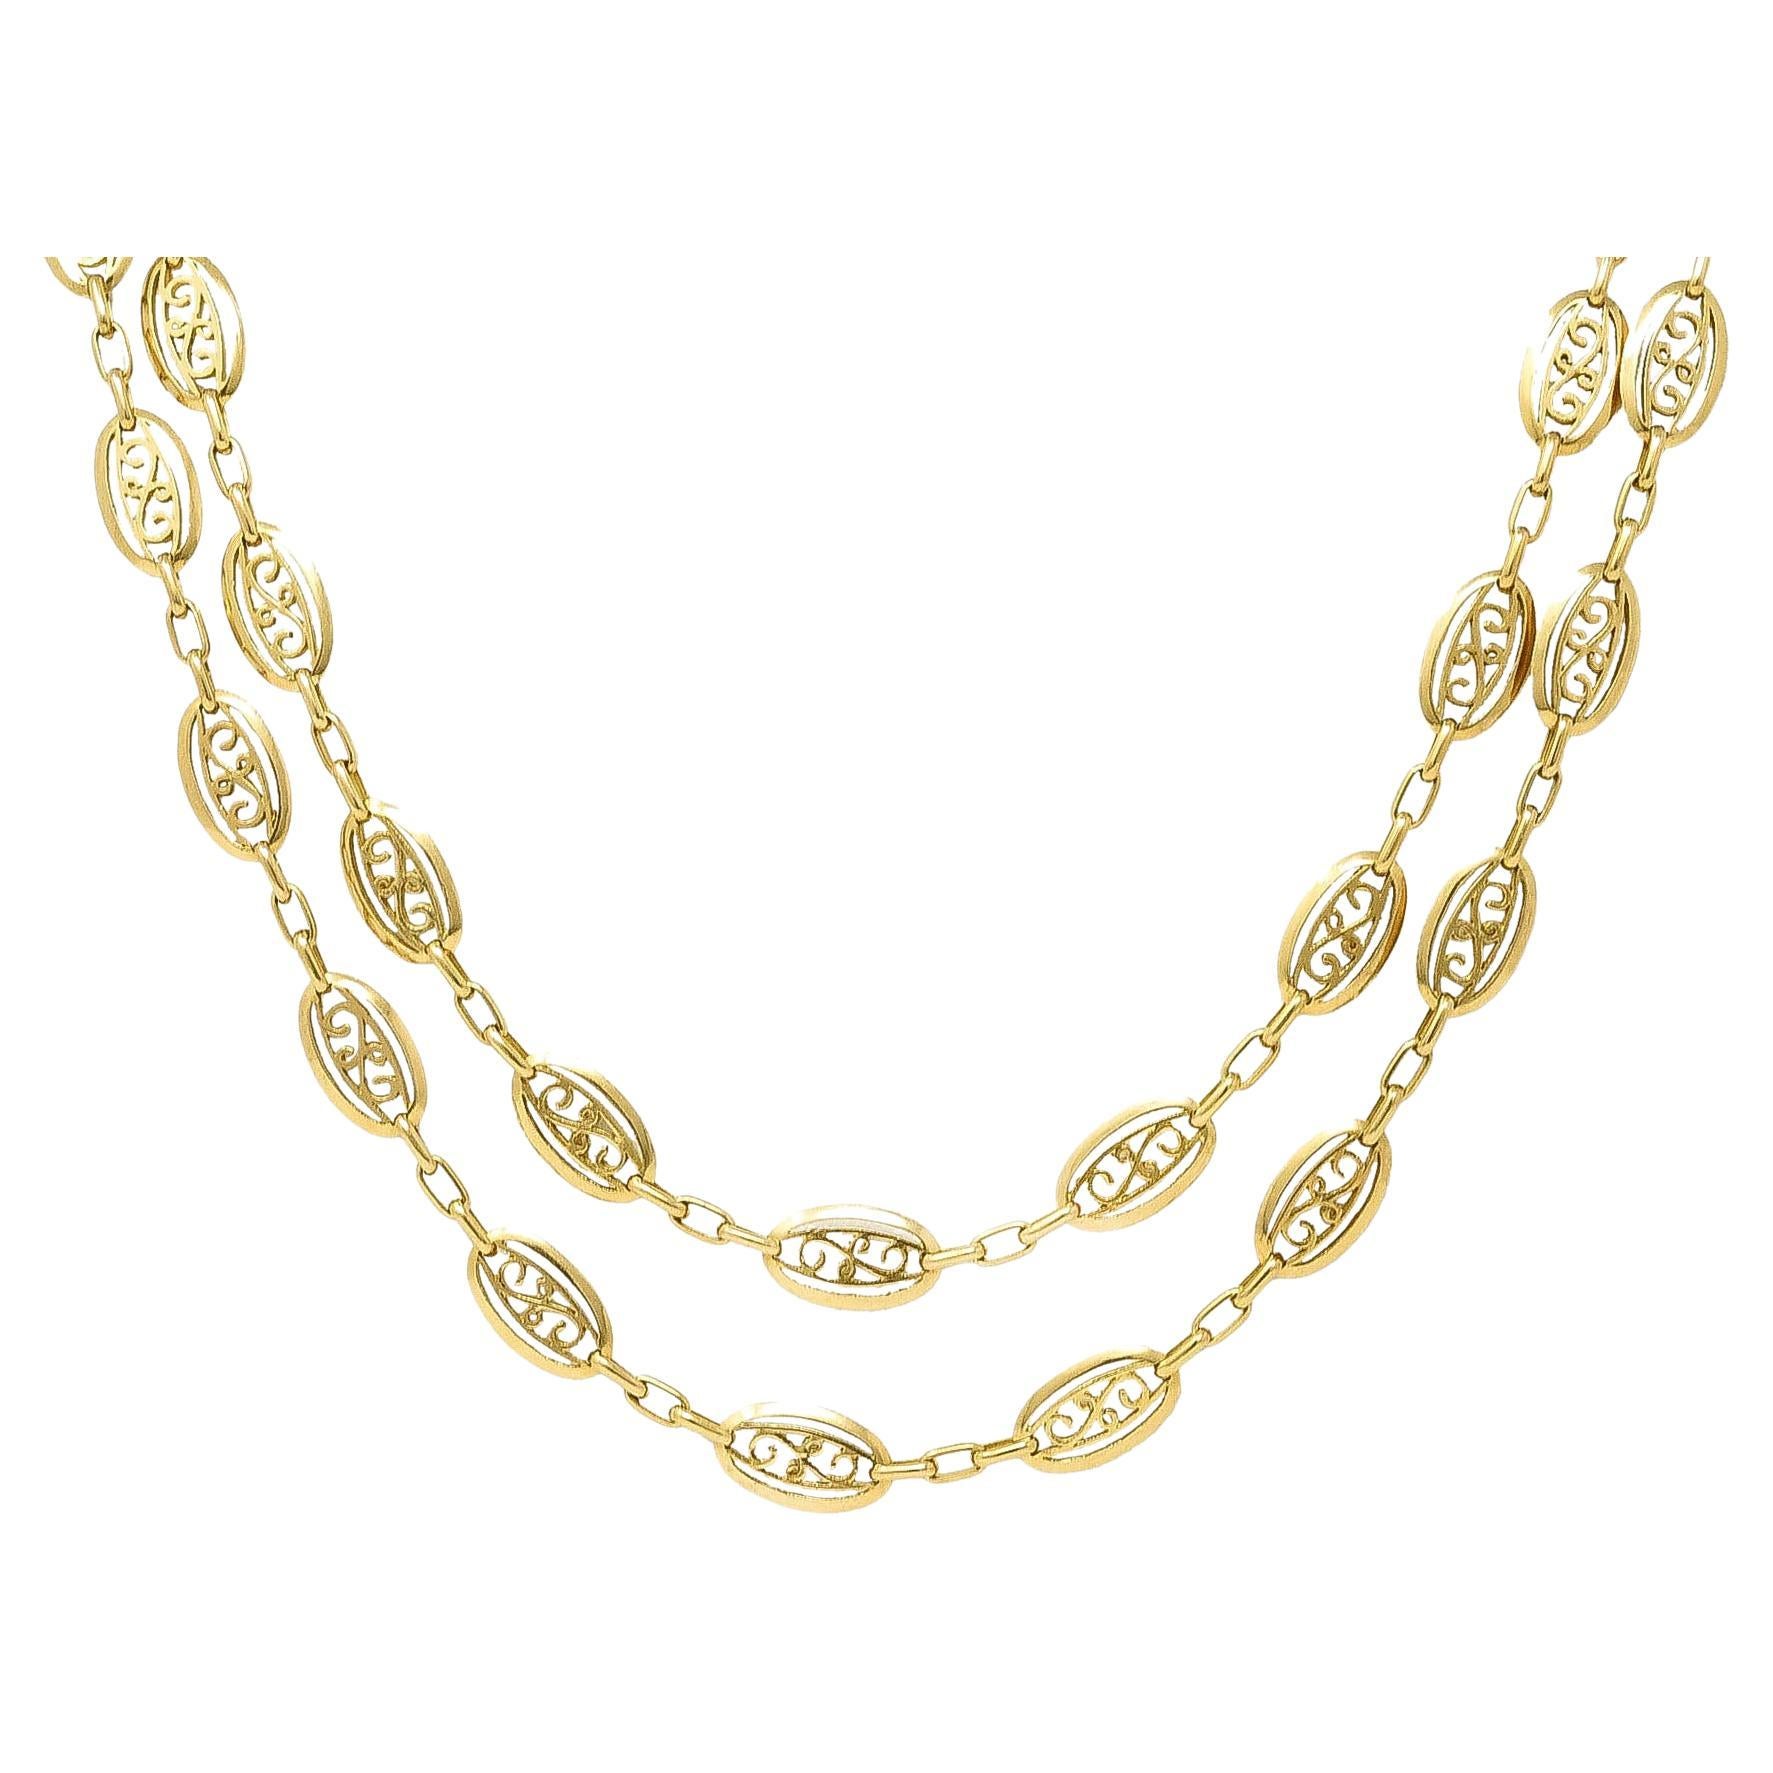 French Victorian 18 Karat Yellow Gold Scroll Long Antique Chain Necklace